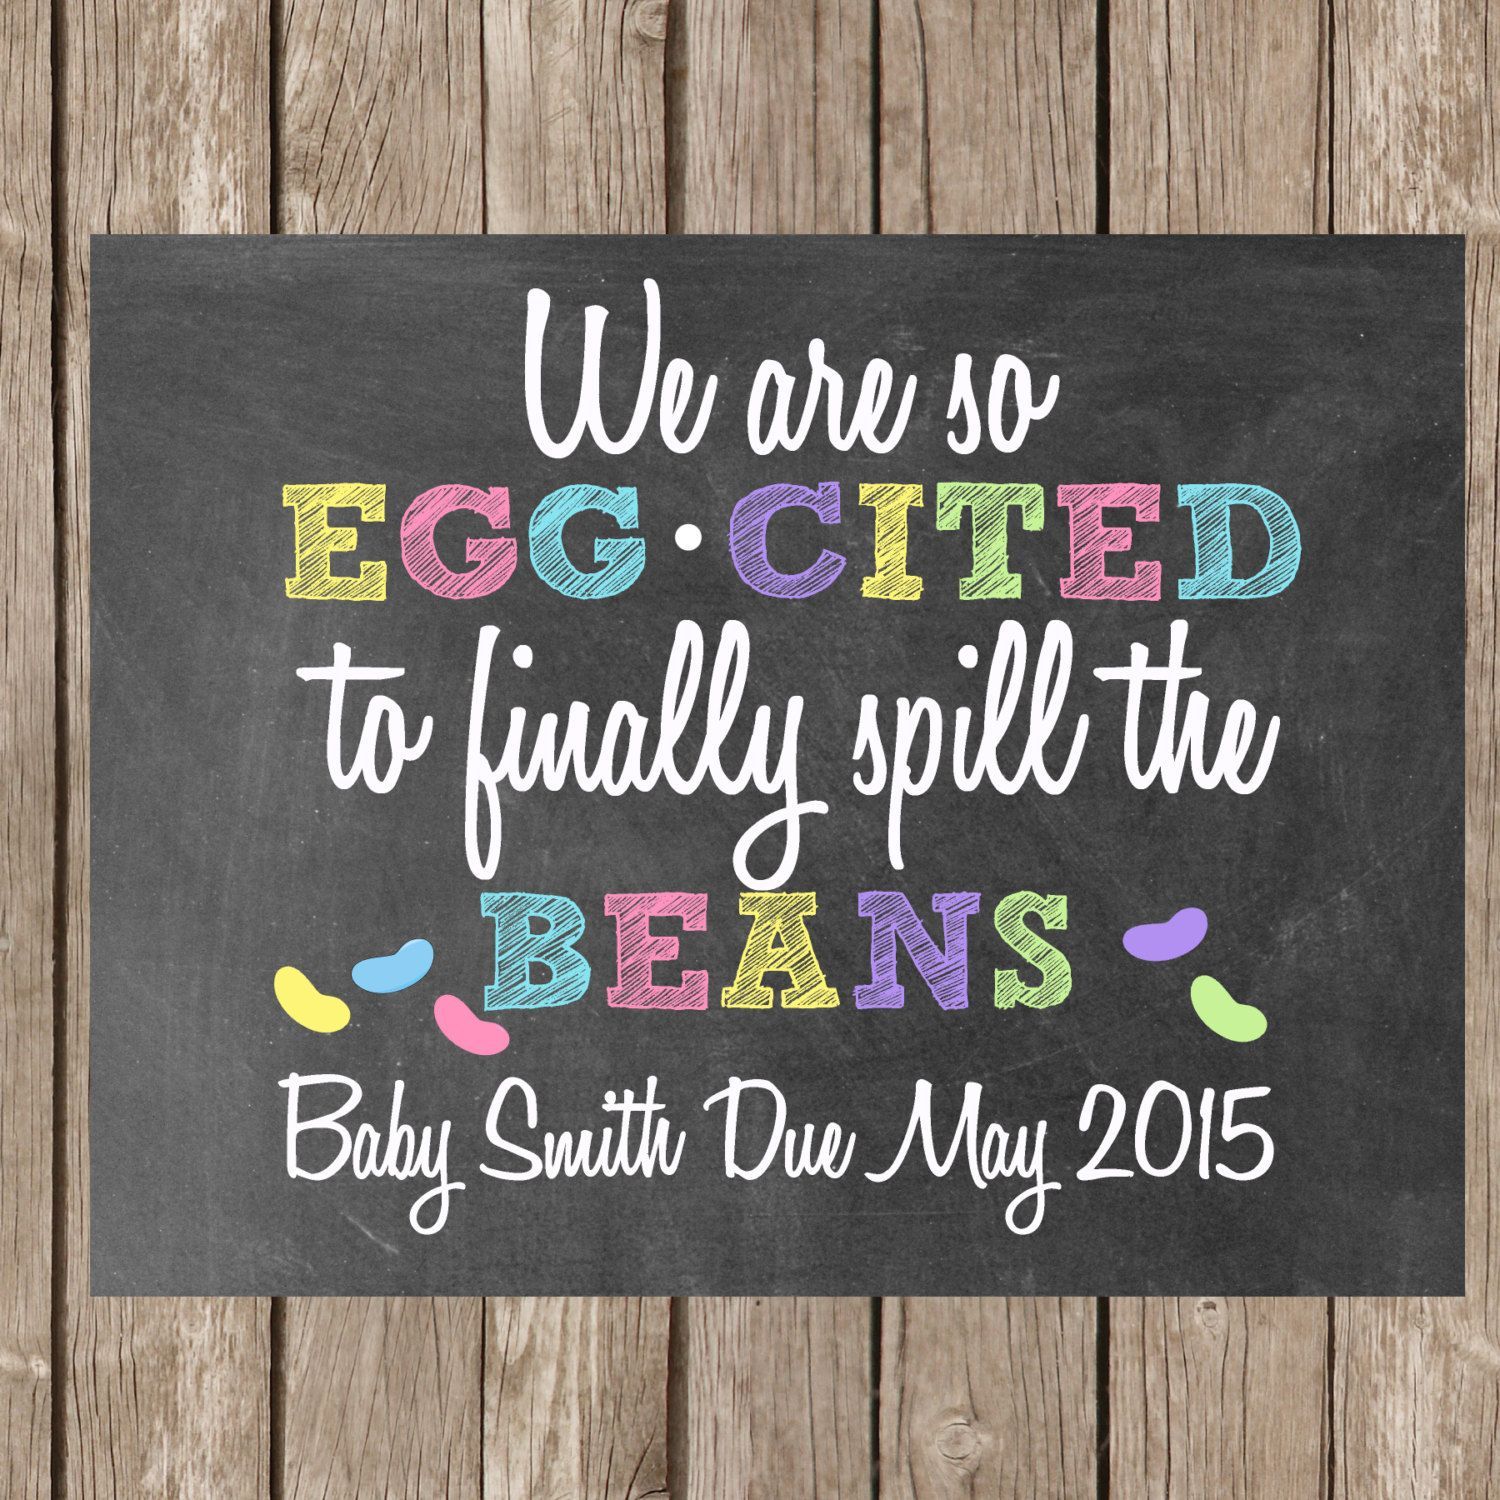 Easter Pregnancy Announcement Sign Digital File Personalized by LetsimpressDesigns on Etsy